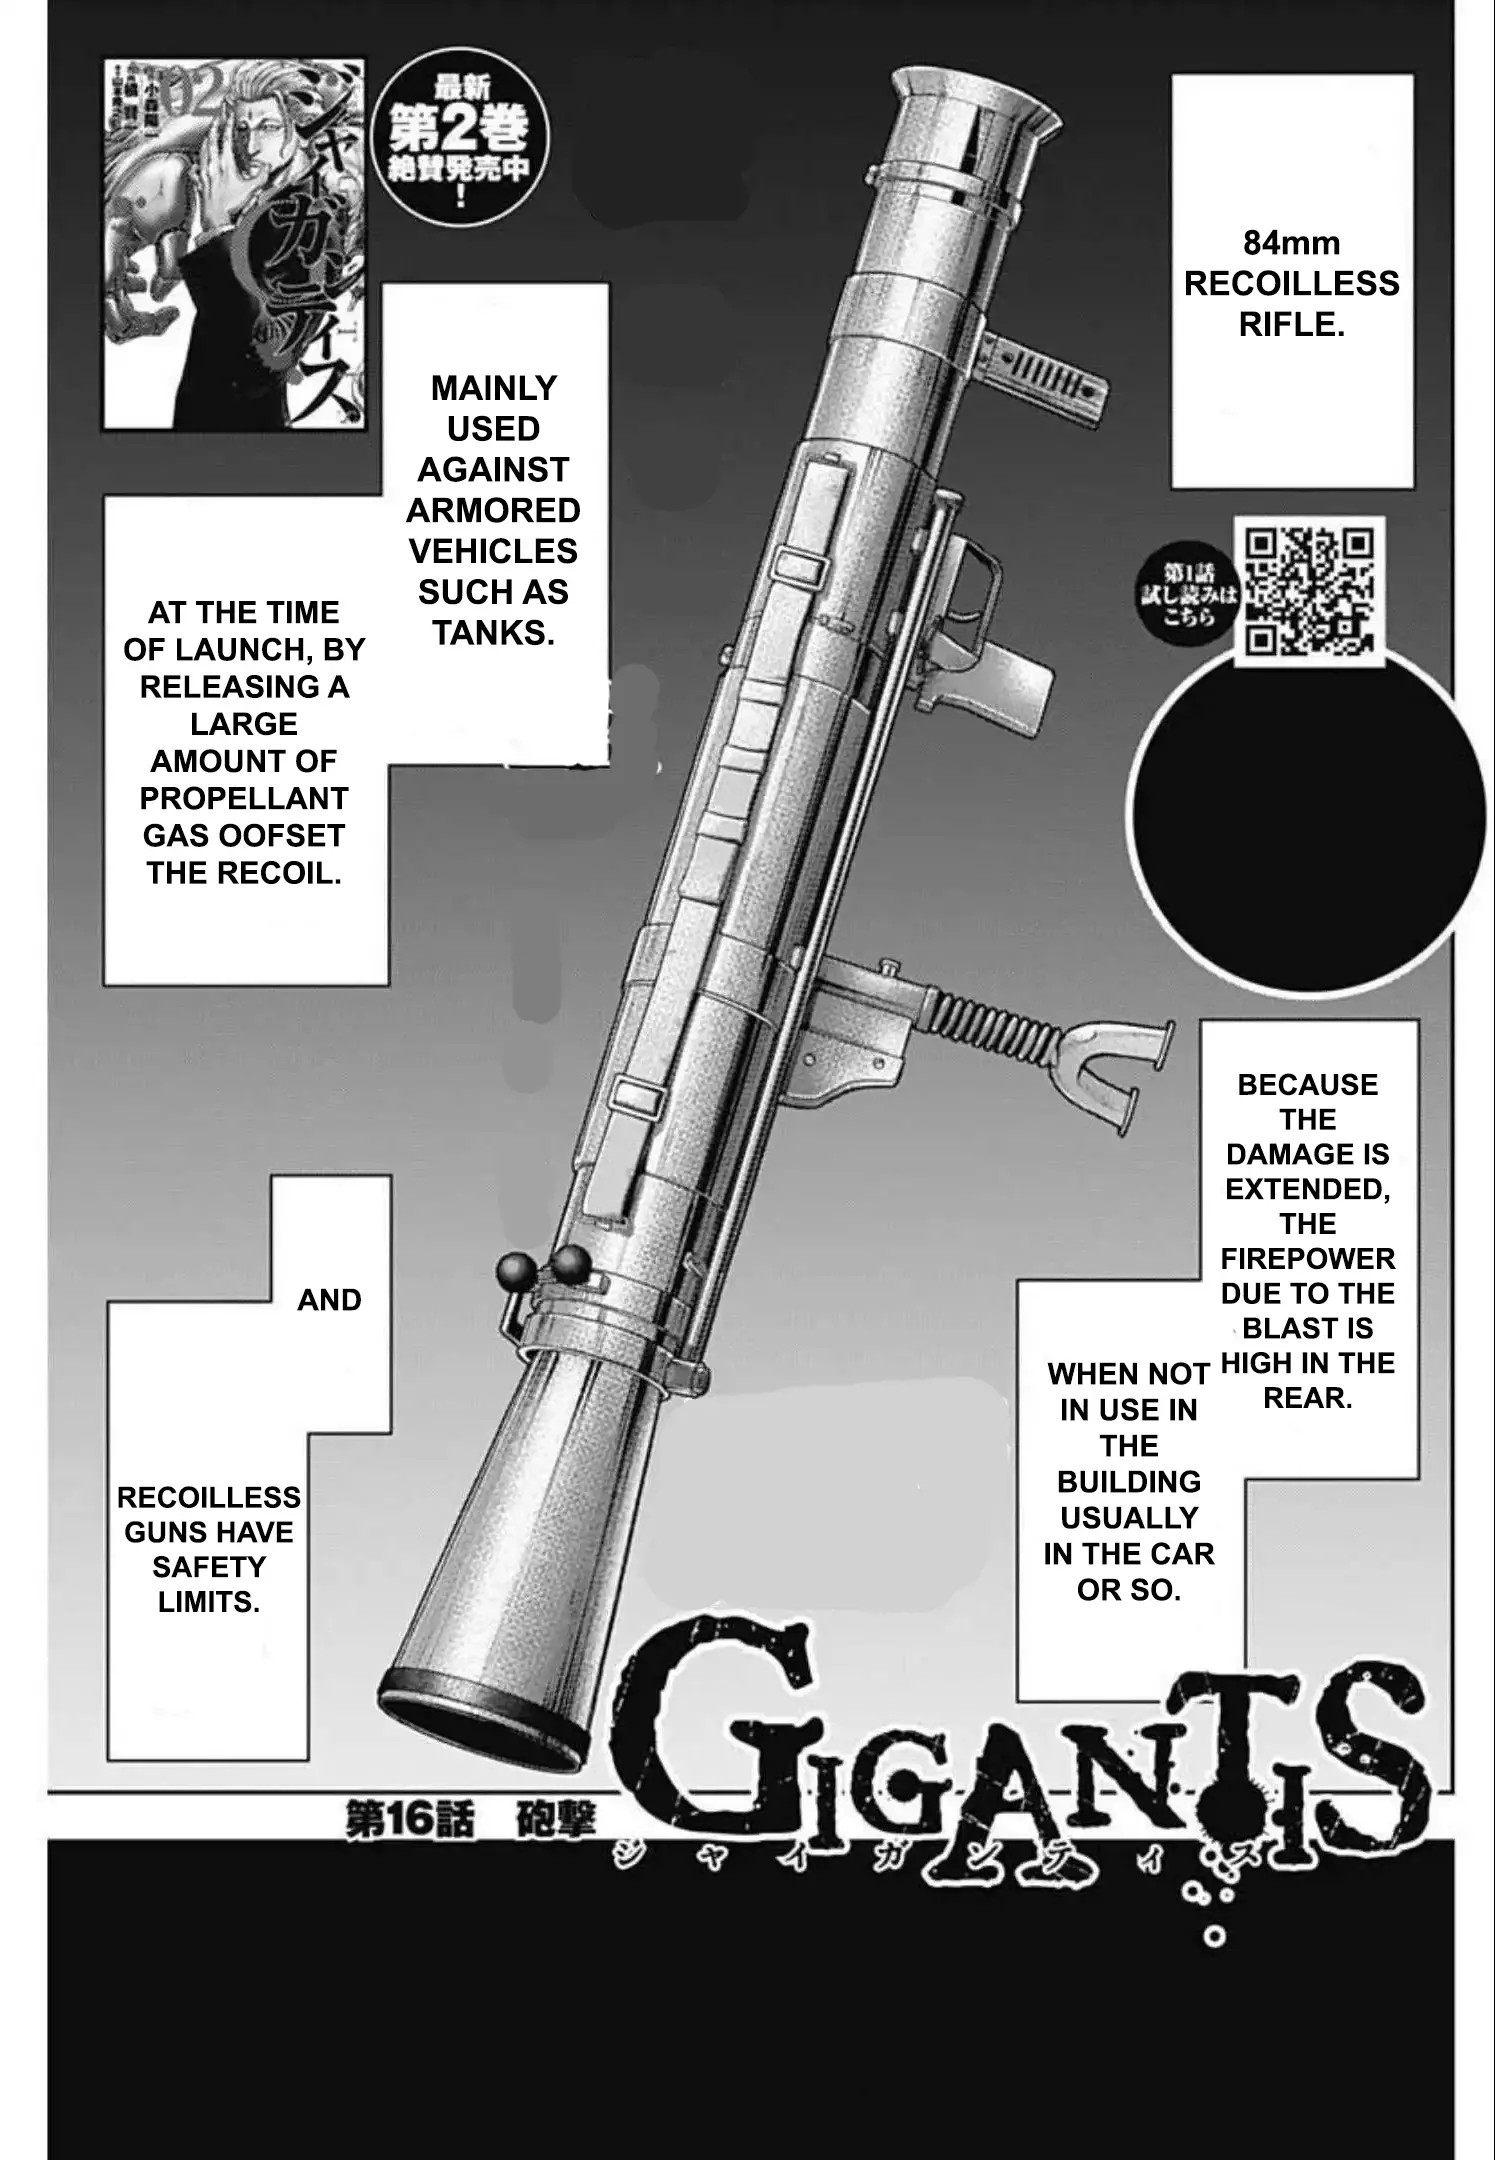 Gigantis - 16 page 1-20a8bfd7